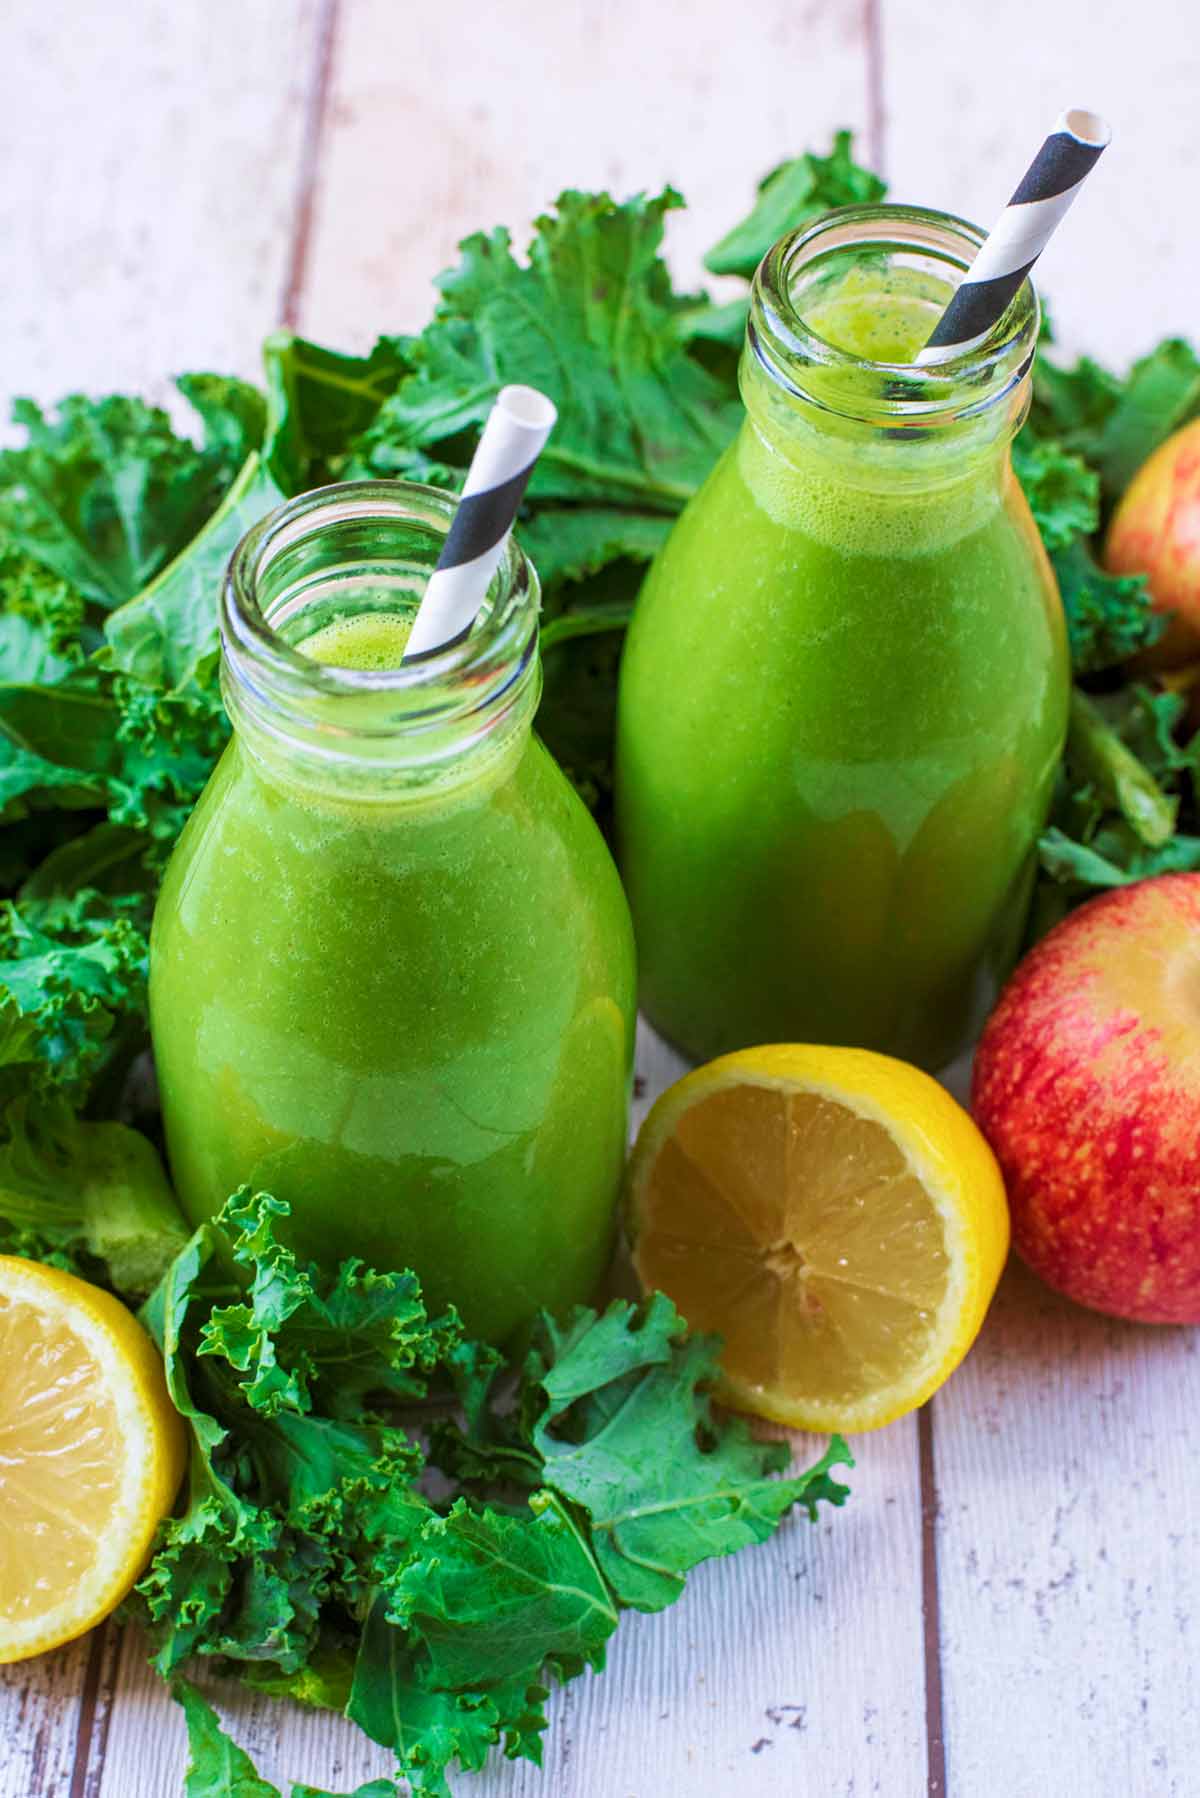 Two bottles of green smoothie surrounded by raw kale, lemon halves and an apple.